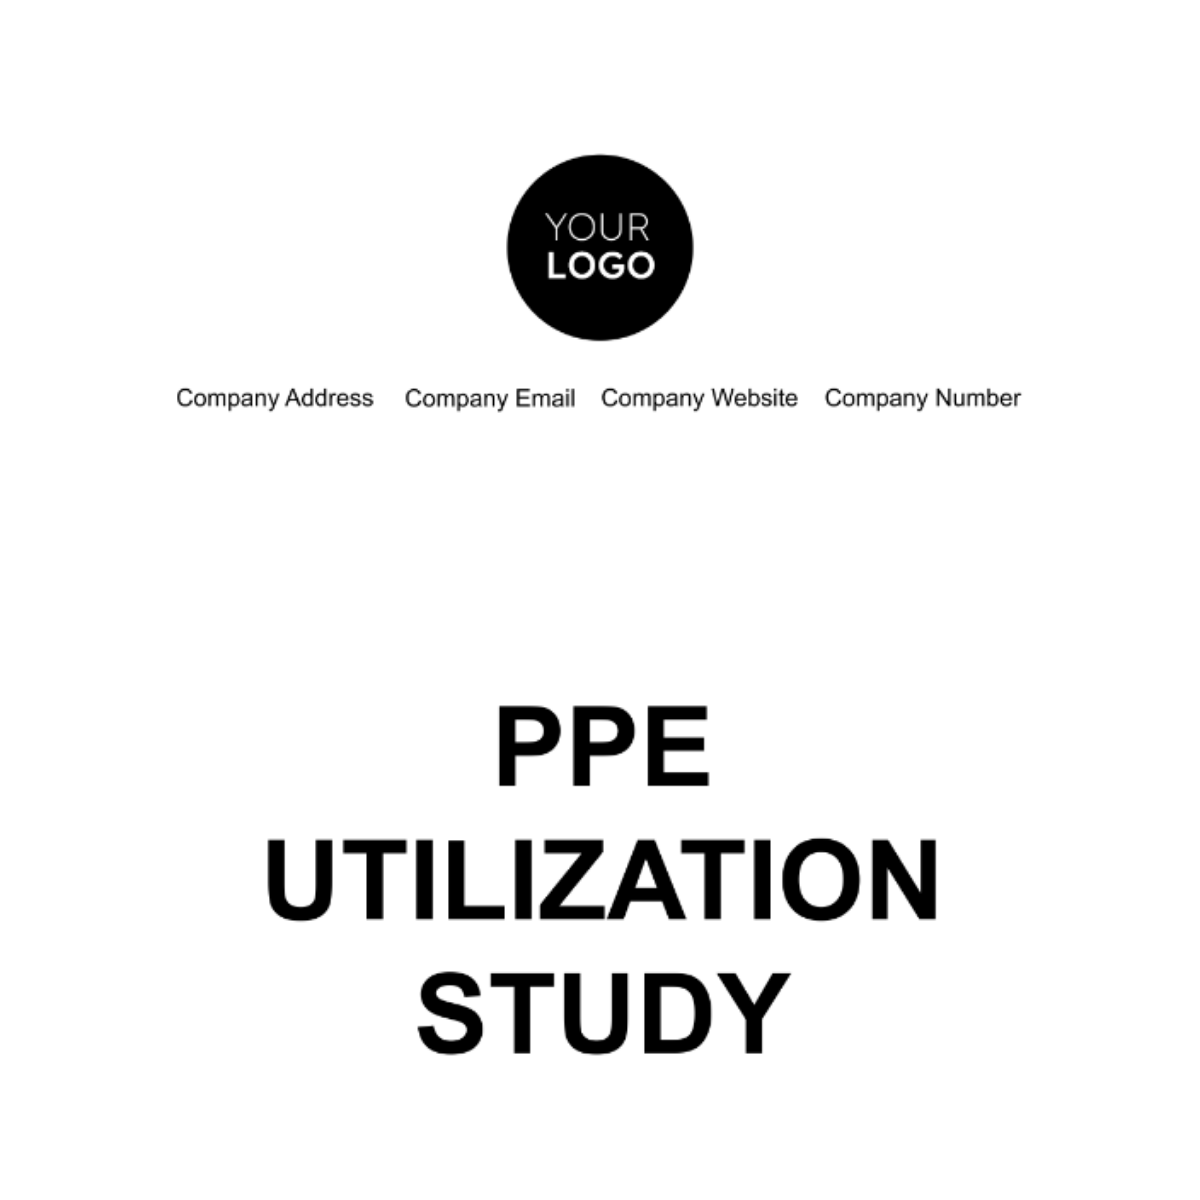 Free PPE Utilization Study Template